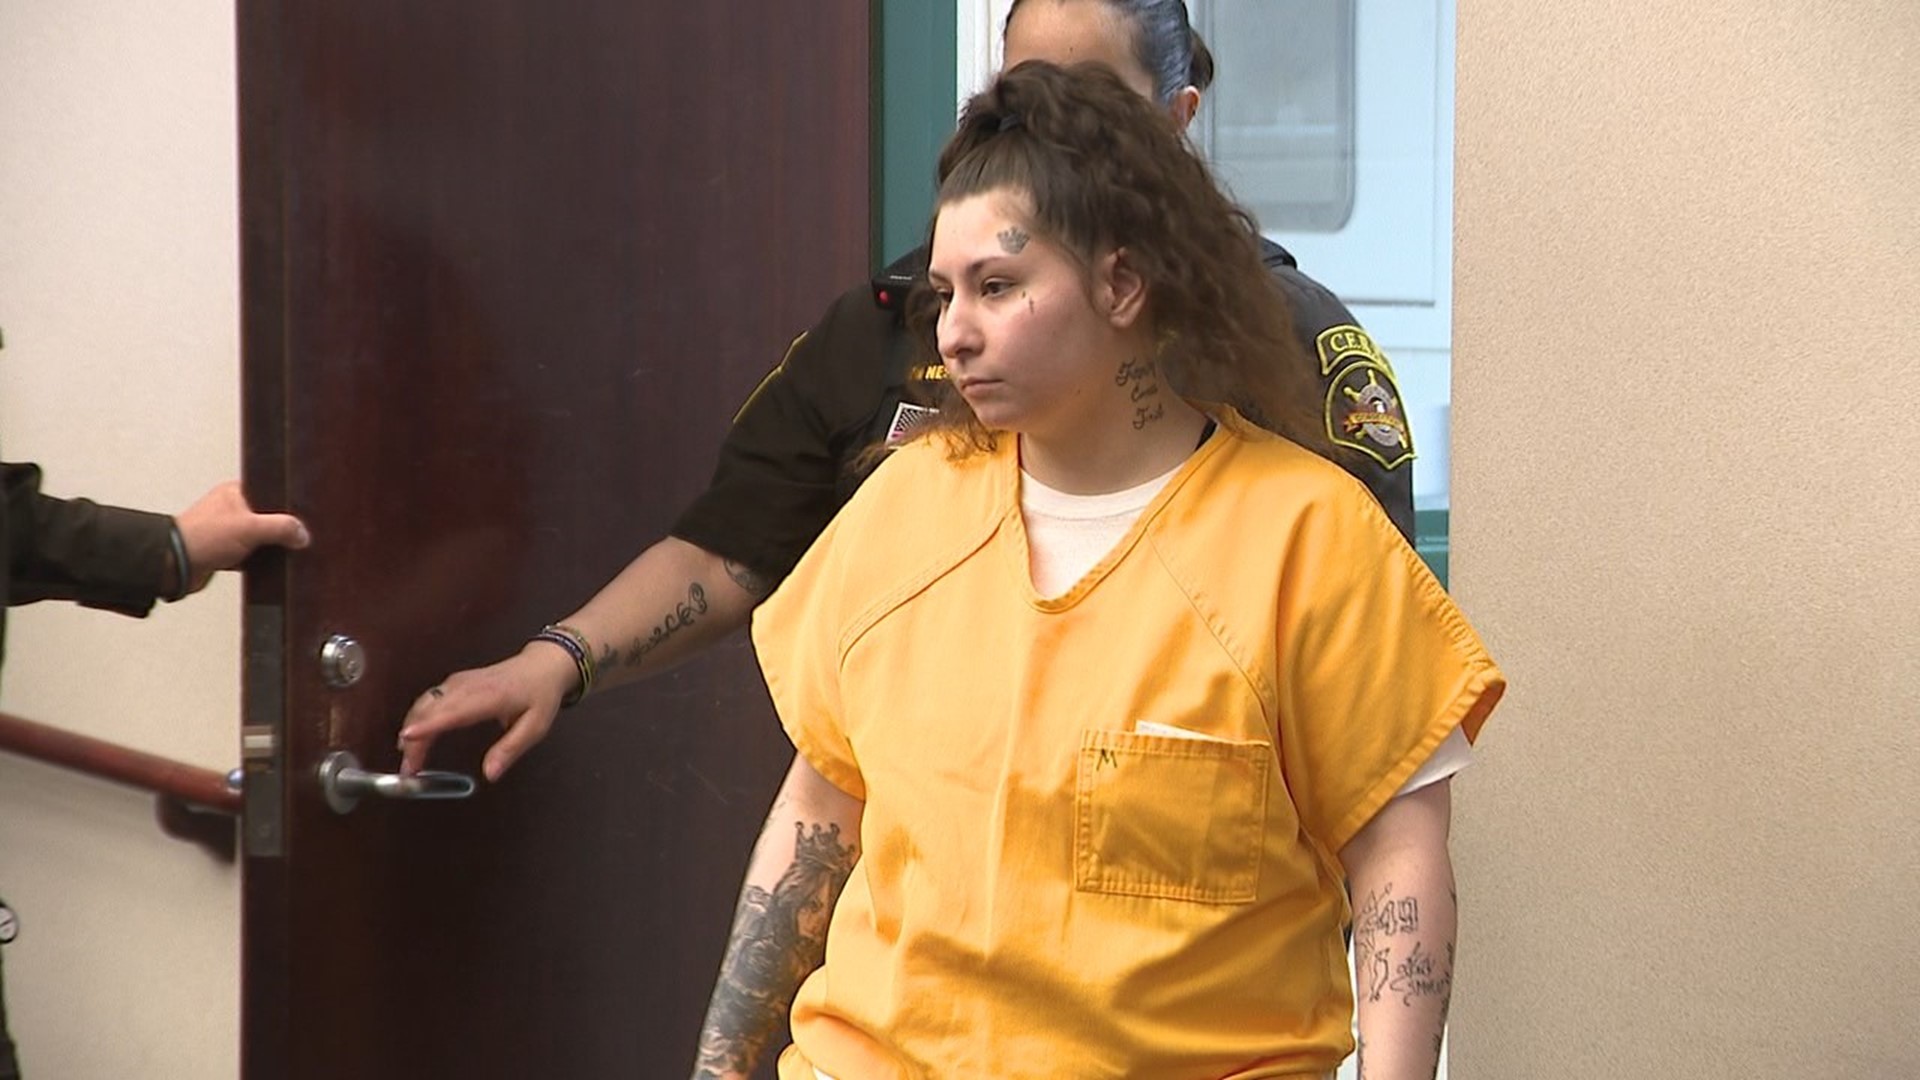 Jimena Jinez, now 20, pleaded guilty in October to stabbing 14-year-old Lyric Stewart to death in 2020.